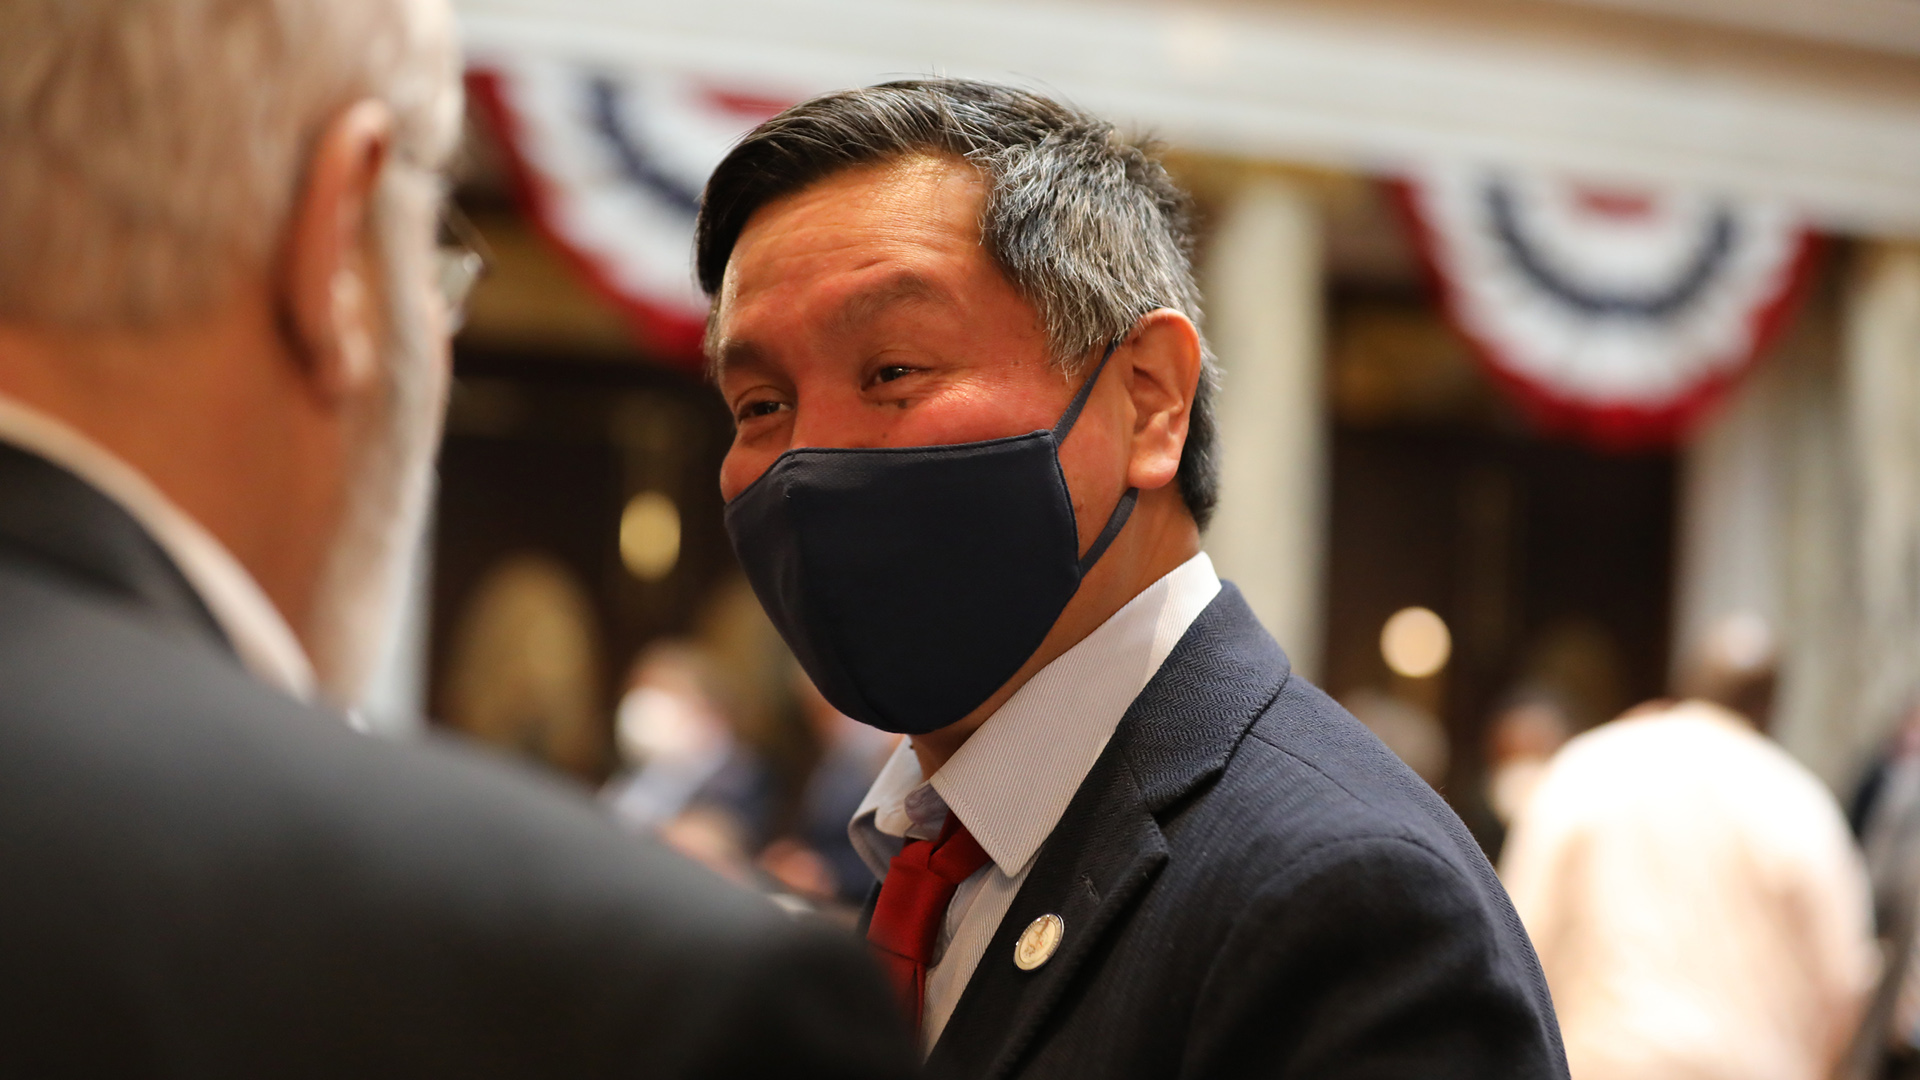 Marlon WhiteEagle wears a face mask while speaking to another person in the Wisconsin Capitol.